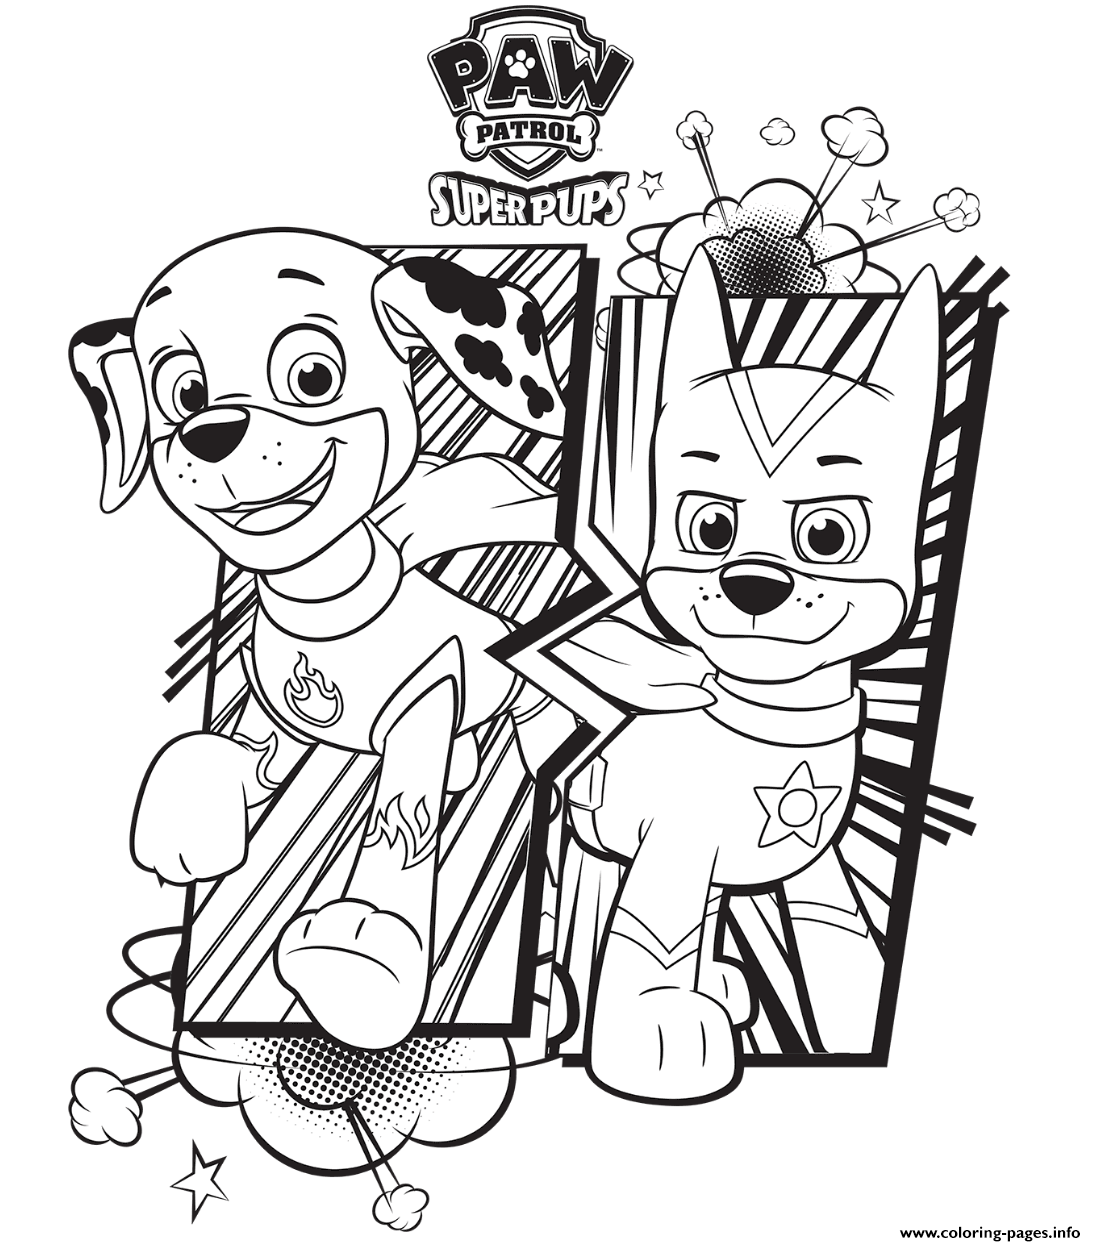 Paw Patrol Super Pups coloring pages